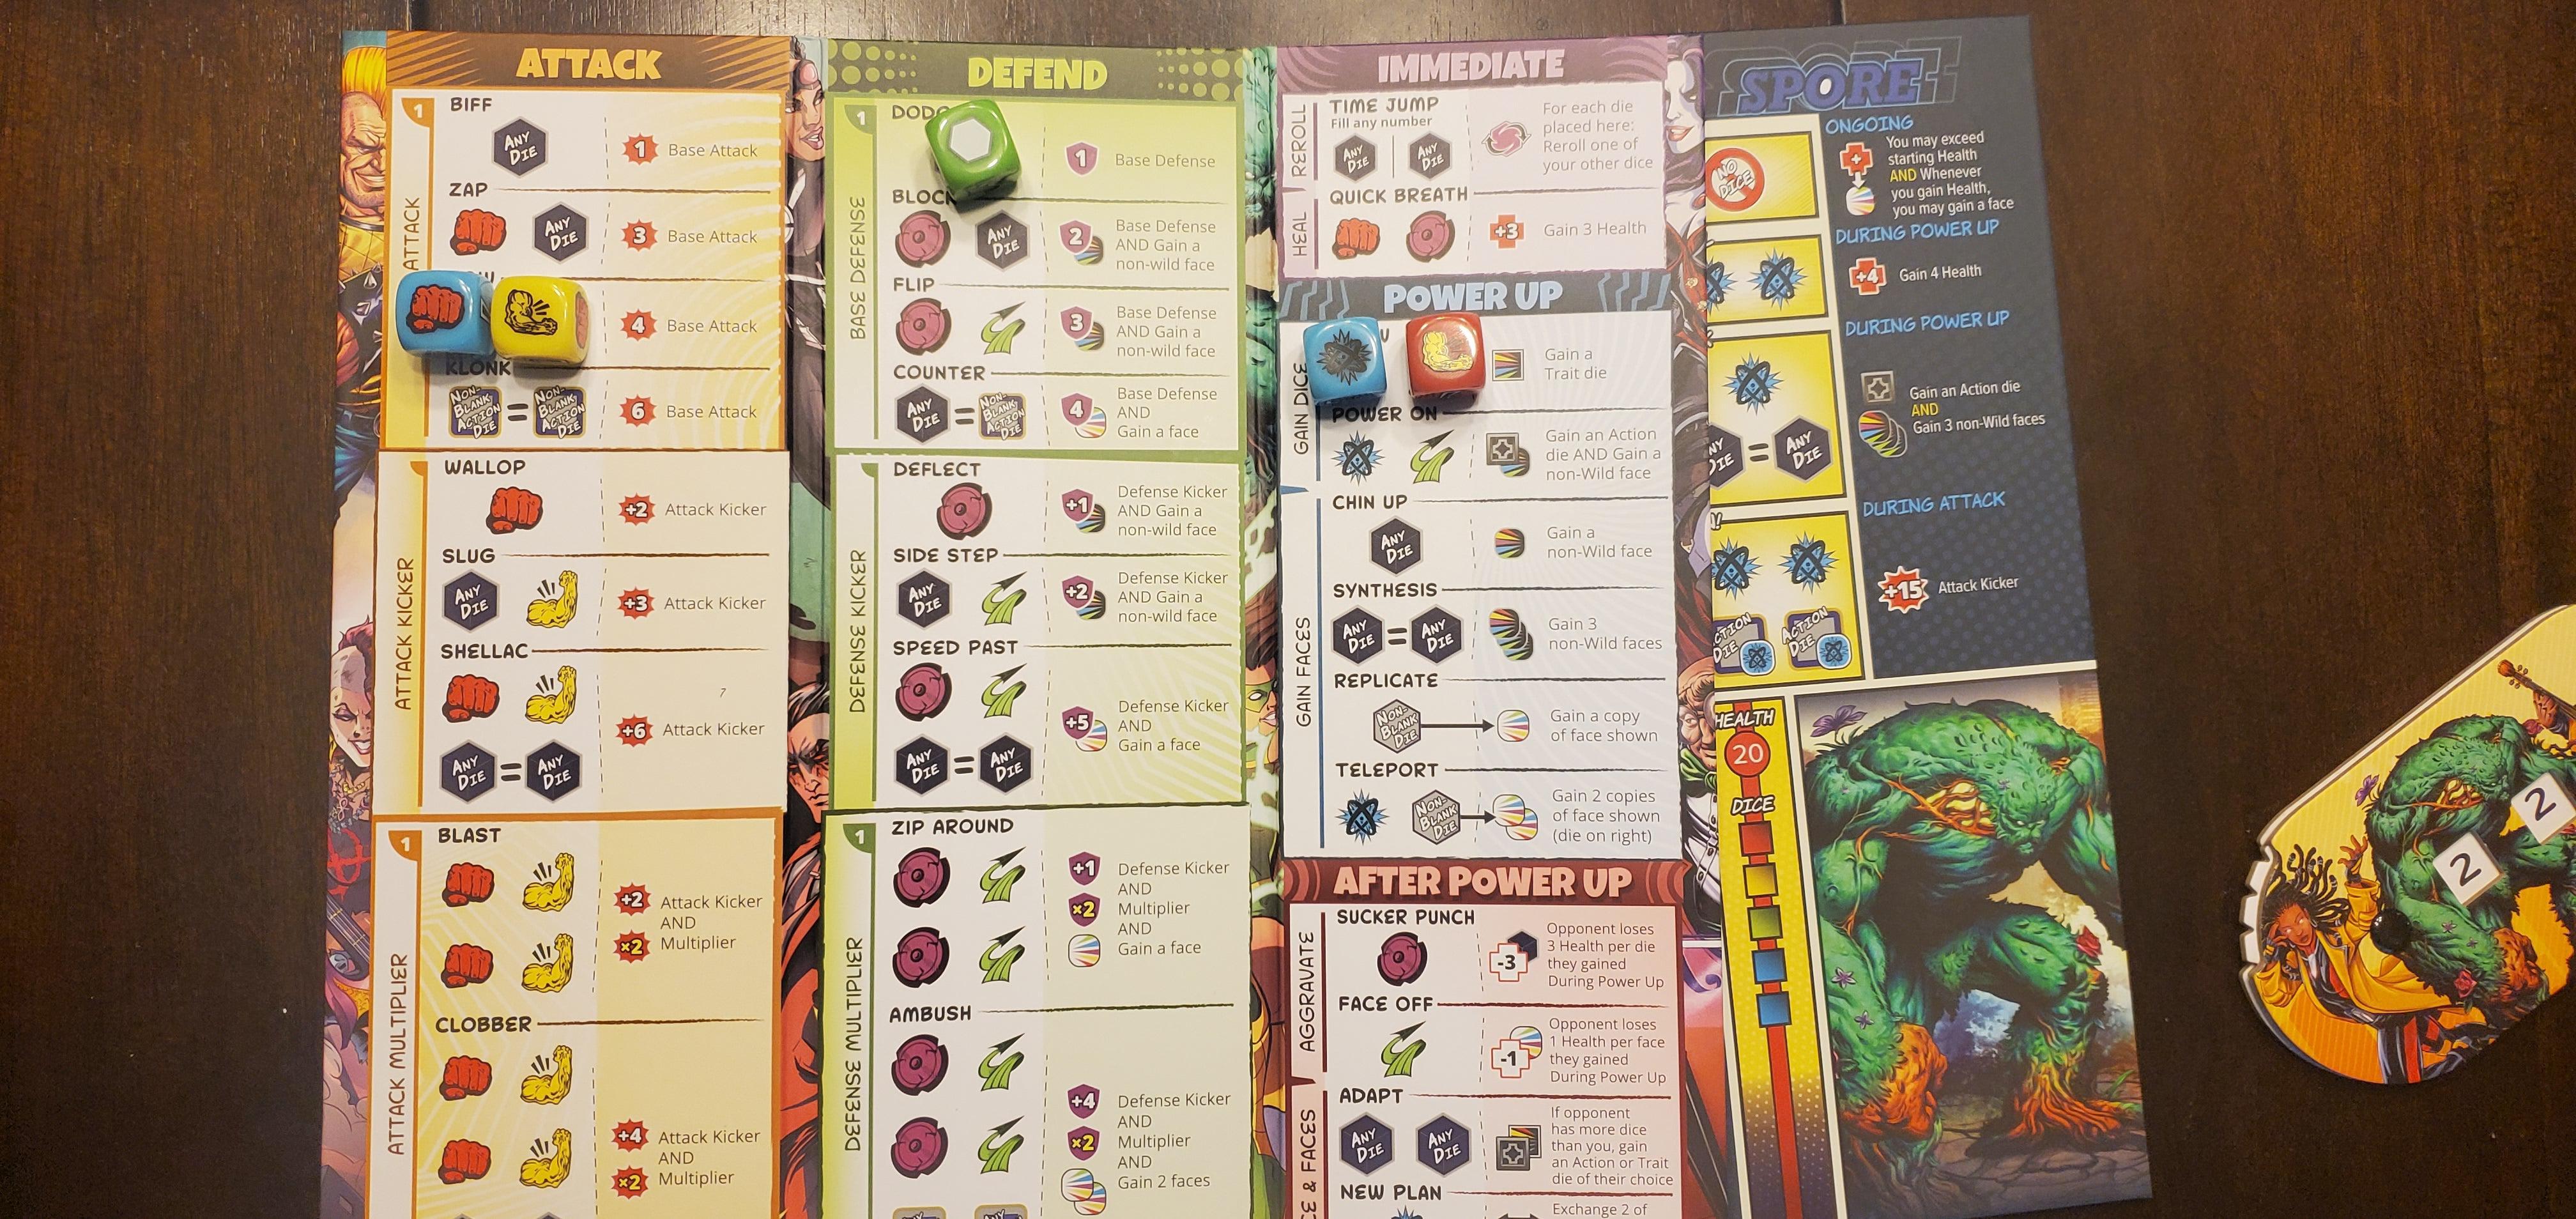 Kapow Board Game Attack Defend Immediate Power Up After Power Up